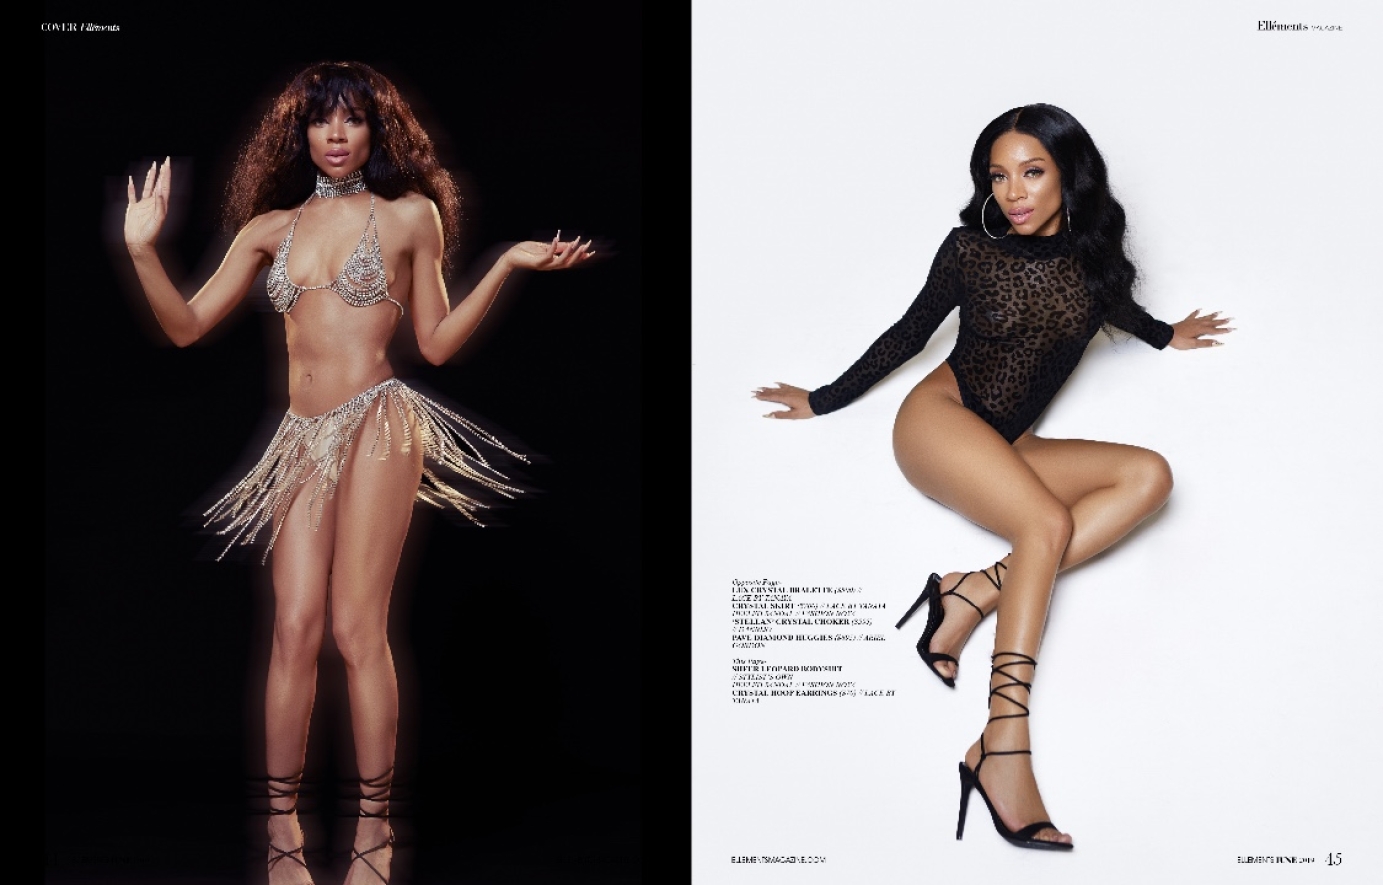 Ellements Cover Shoot featuring Lil Mama